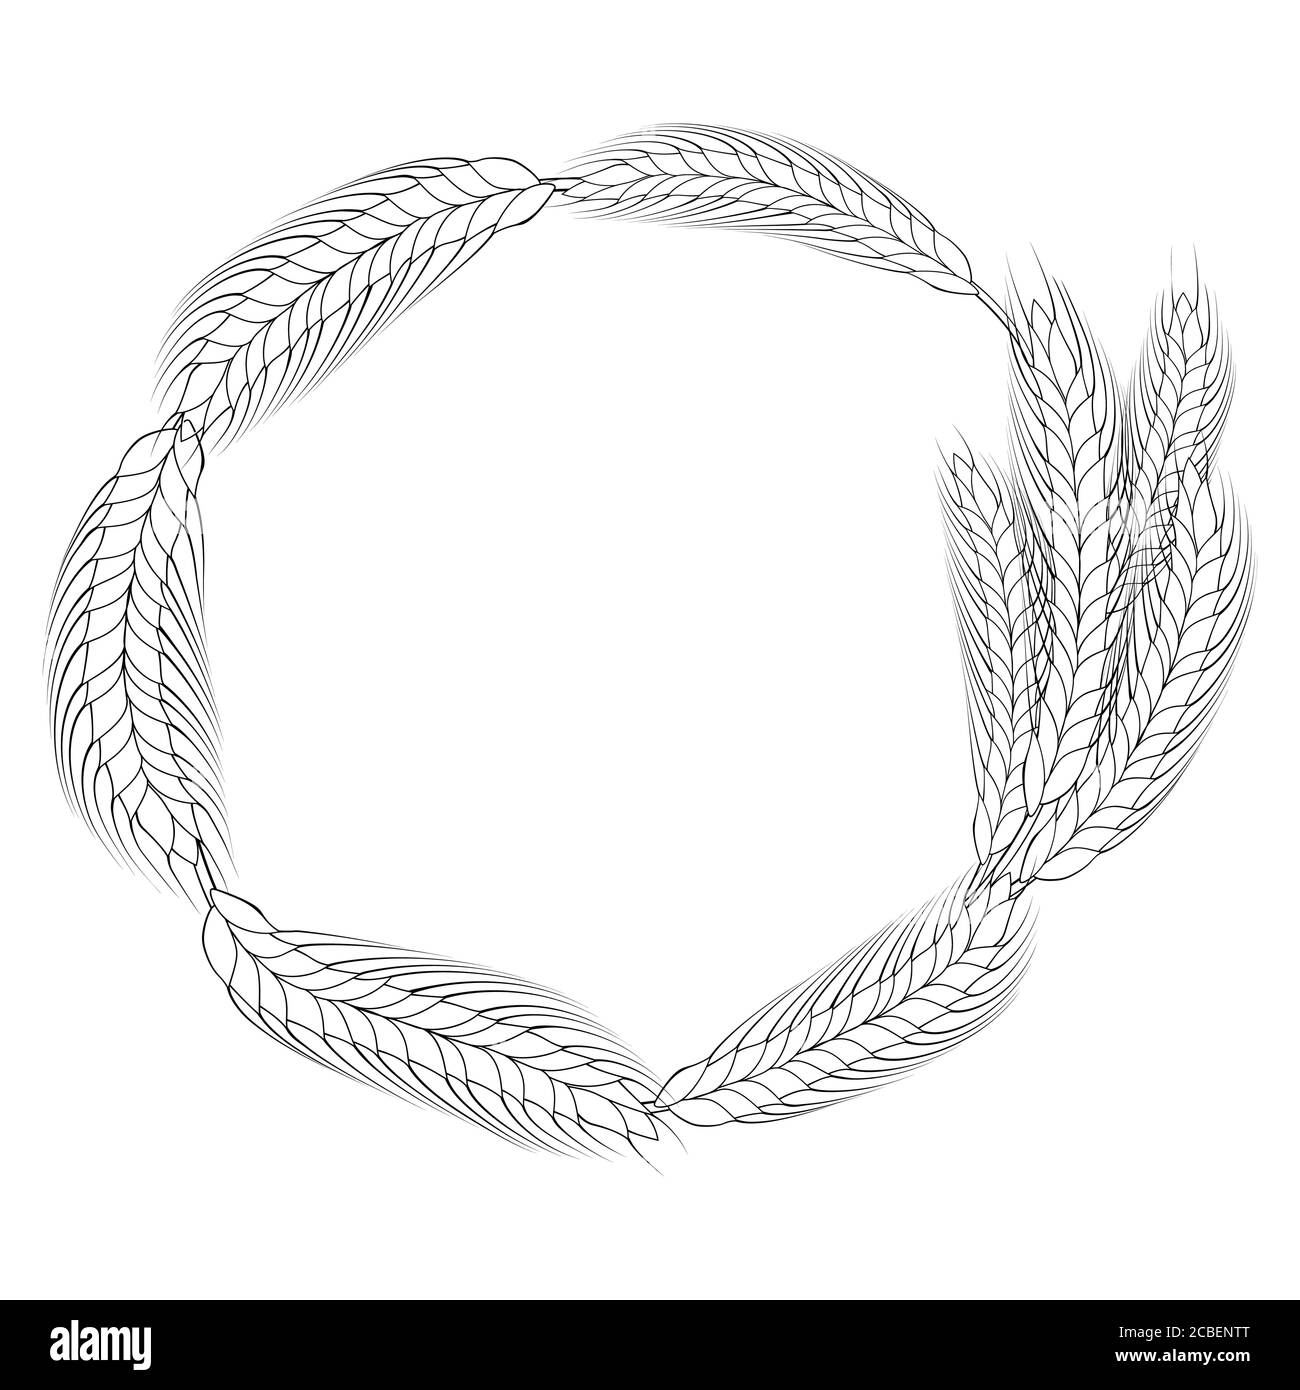 monochrome line art wreath of wheat. frame with copy space isolated on ...